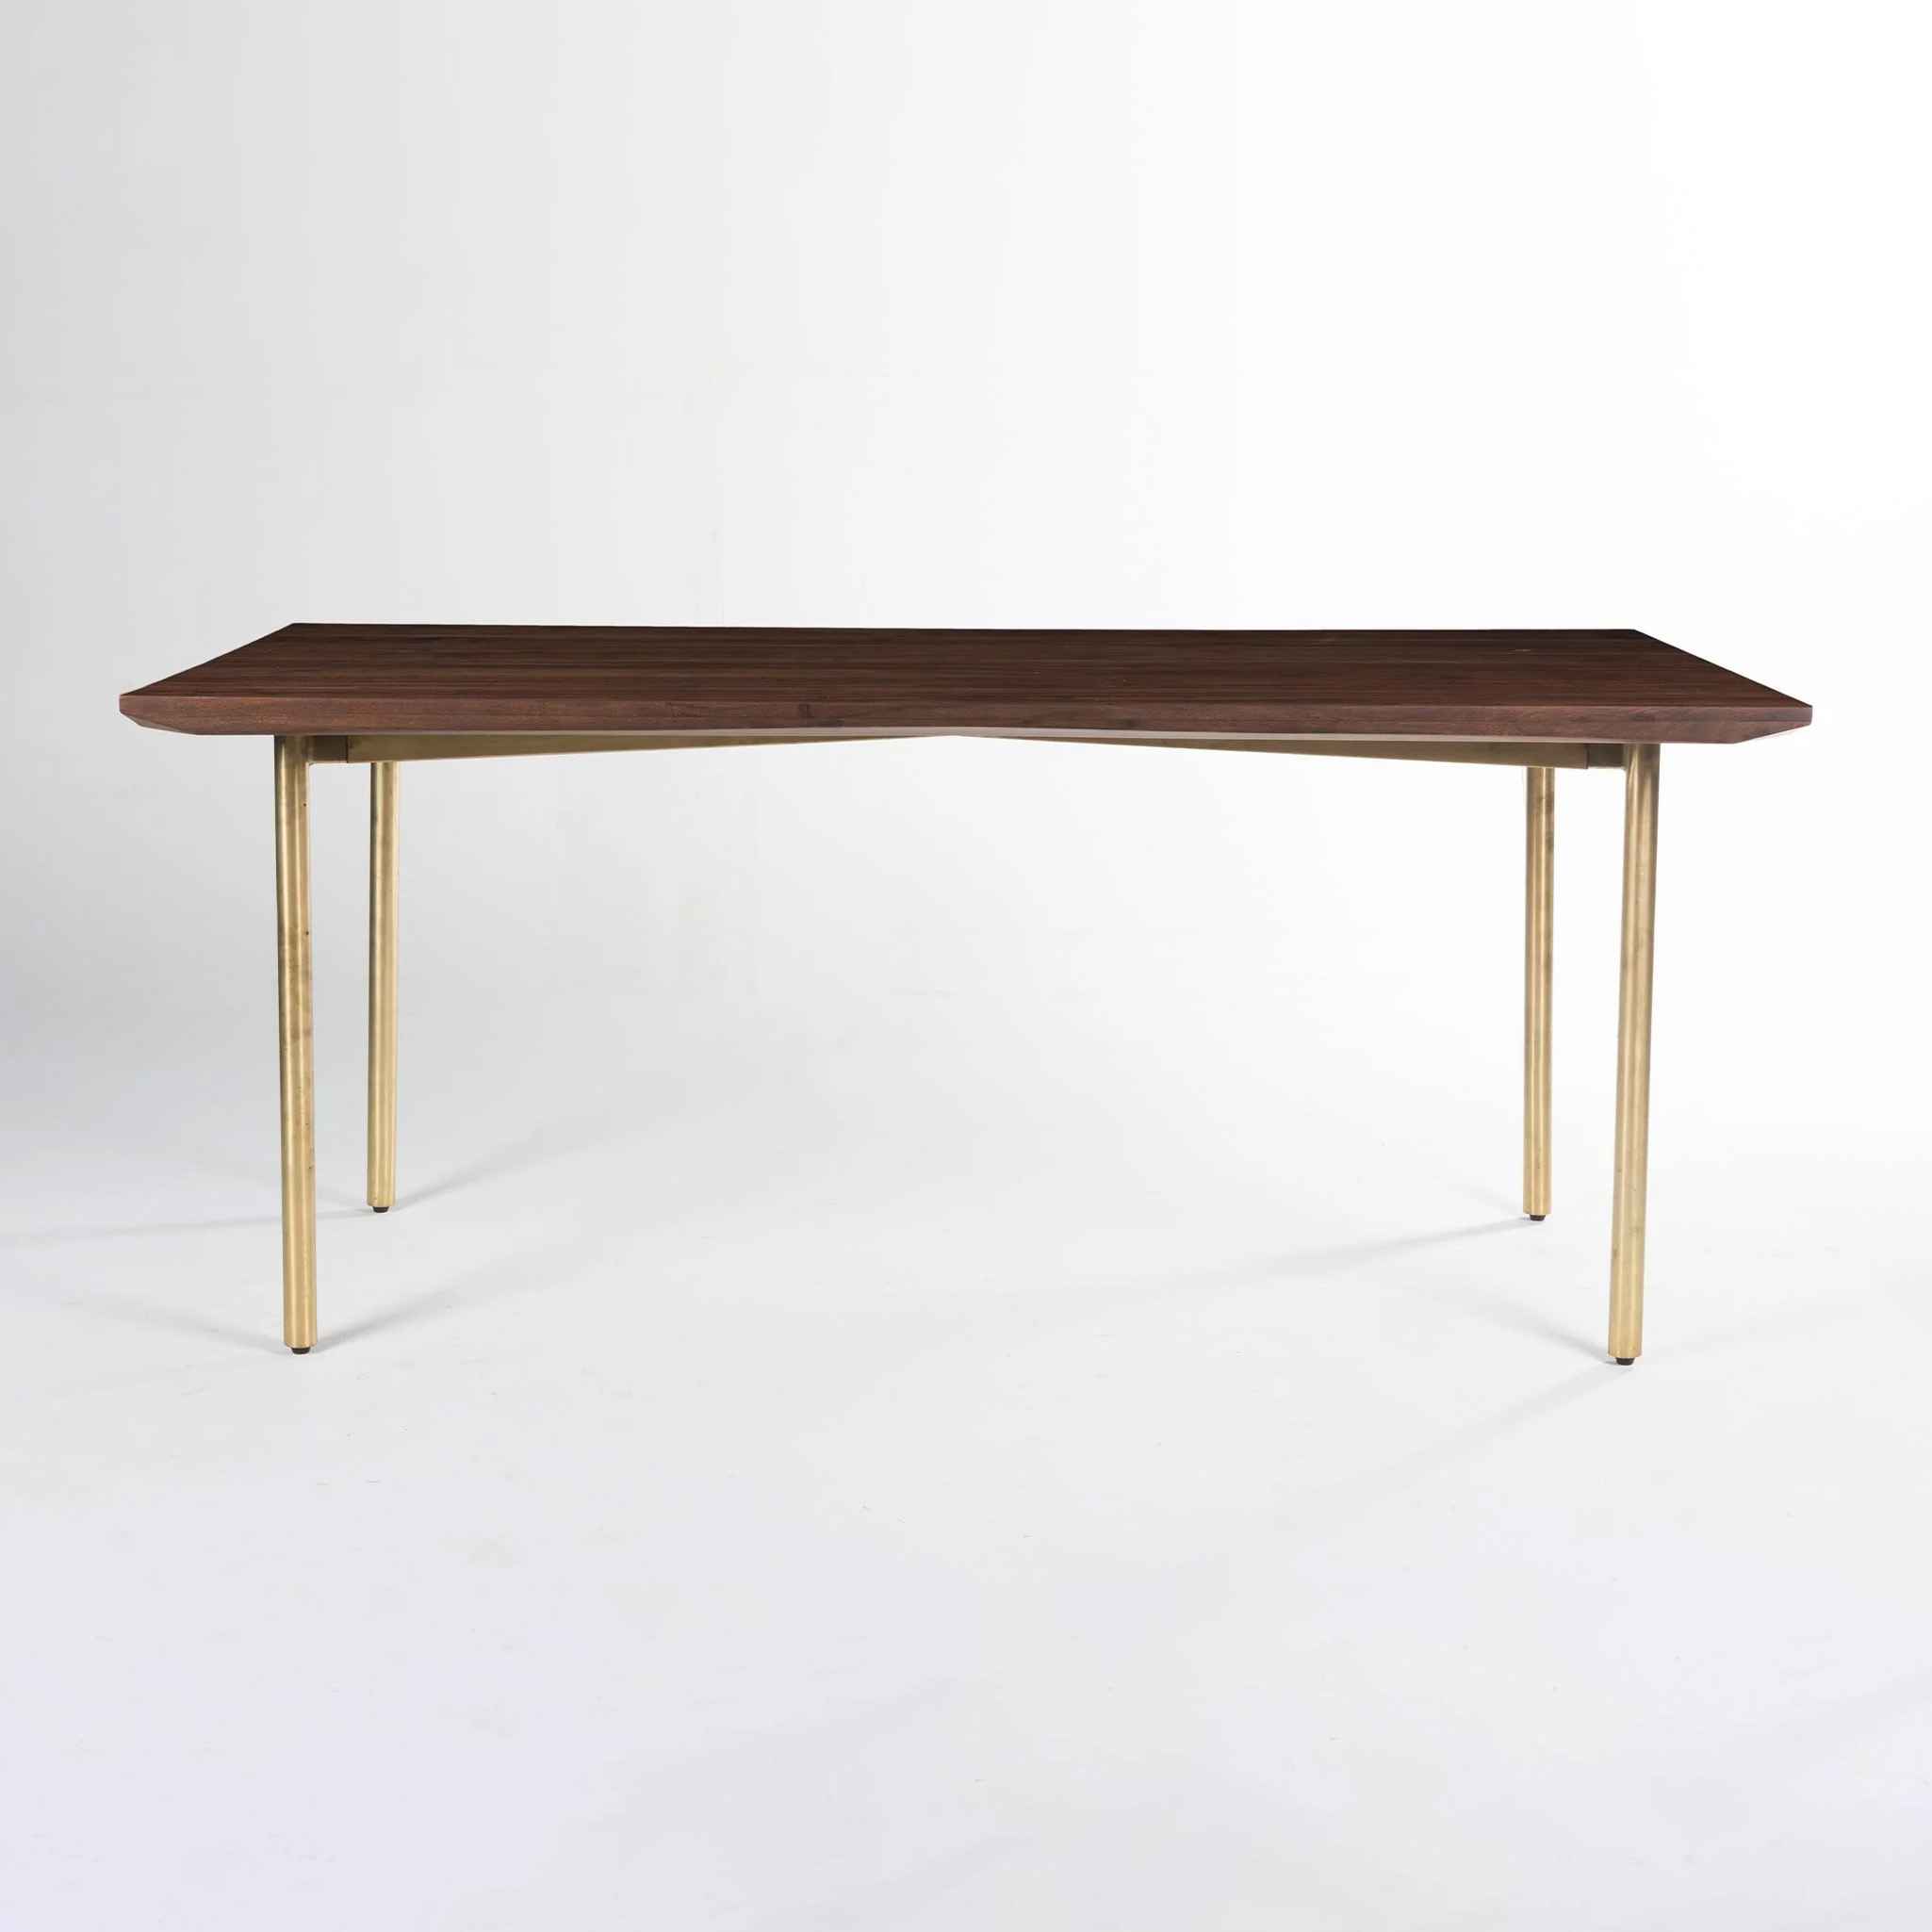 Bicasso Dining Table 4 Seater